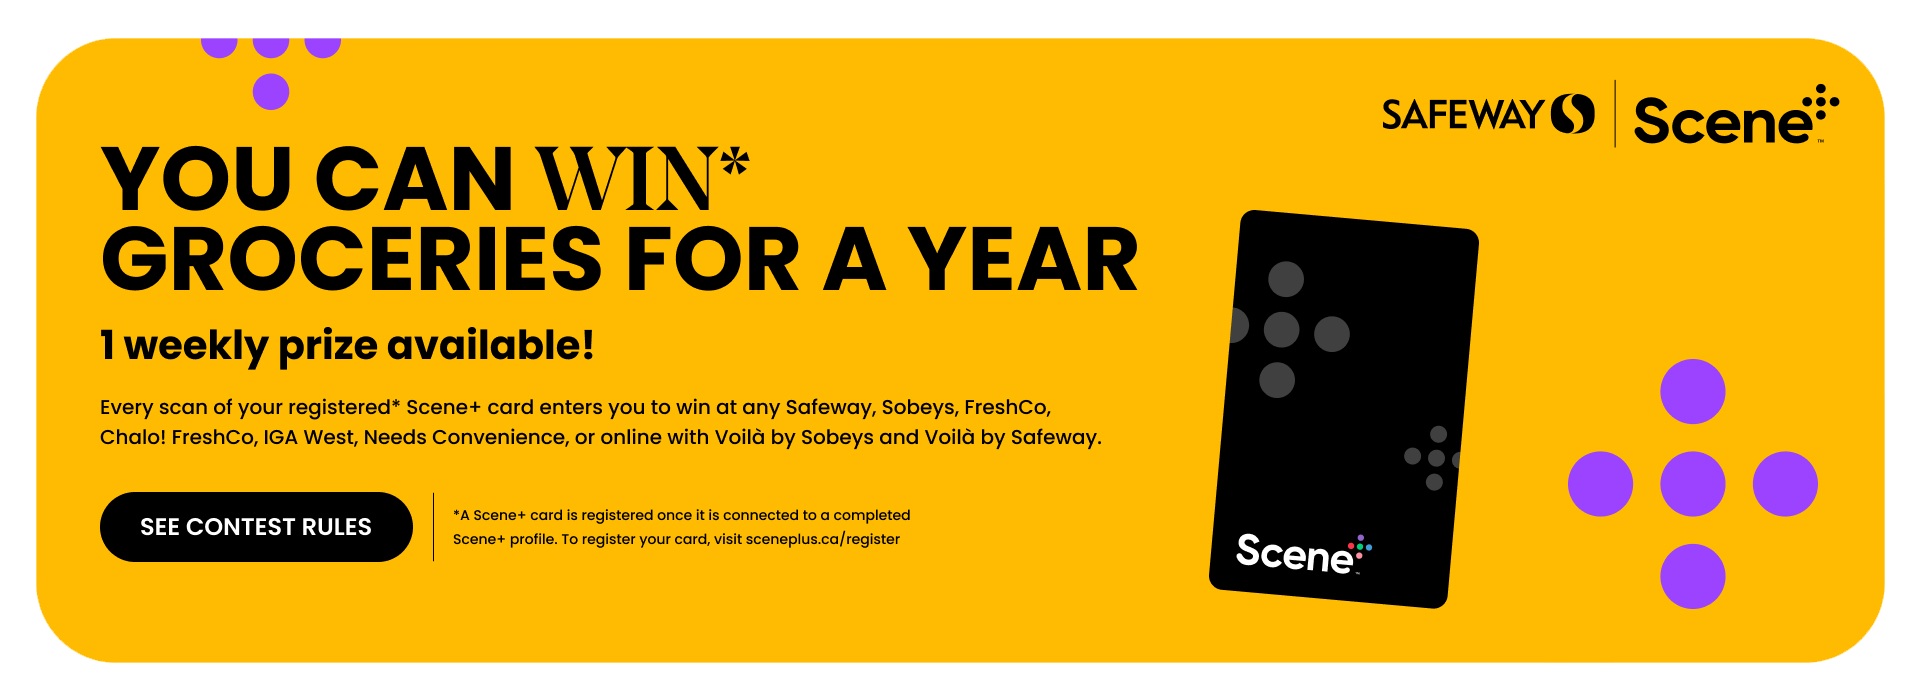 Text Reading 'You can win* groceries for a year. 1 weekly prize available! Every scan of your registered* Scene+ card enters you to win at any Safeway, Sobeys, FreshCo, Chalo! FreshCo, IGA West, Needs Convenience, or online with Voilà by Sobeys and Voilà by Safeway. Click on 'See Contest Rules' button to learn more.'